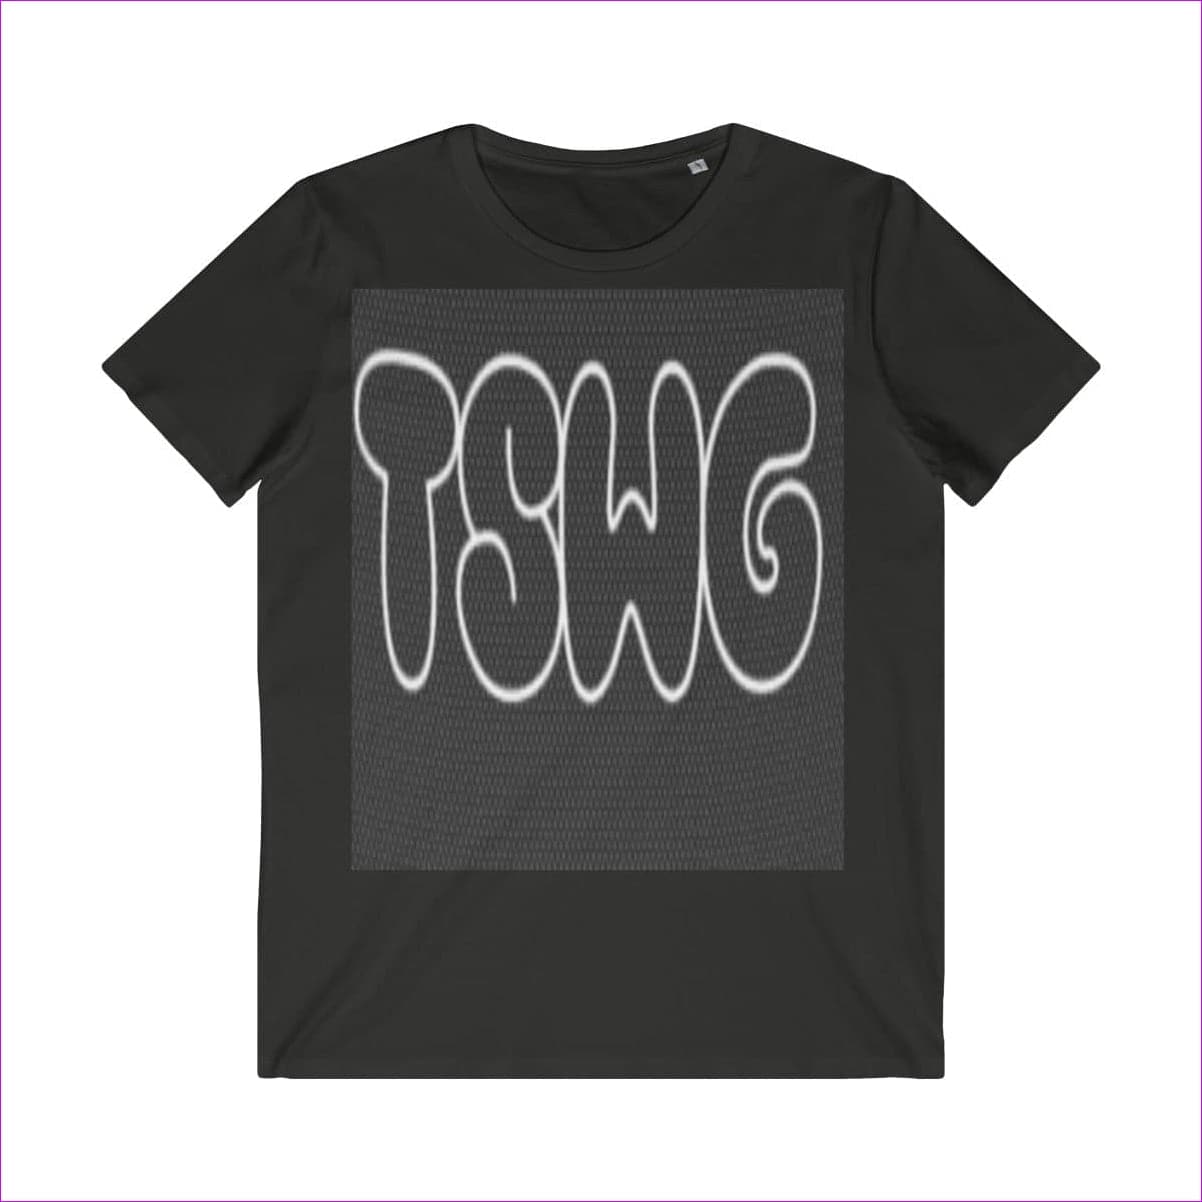 Anthracite - TSWG ( Tough Smooth Well Groomed) Men's Organic Tee - T-Shirt at TFC&H Co.